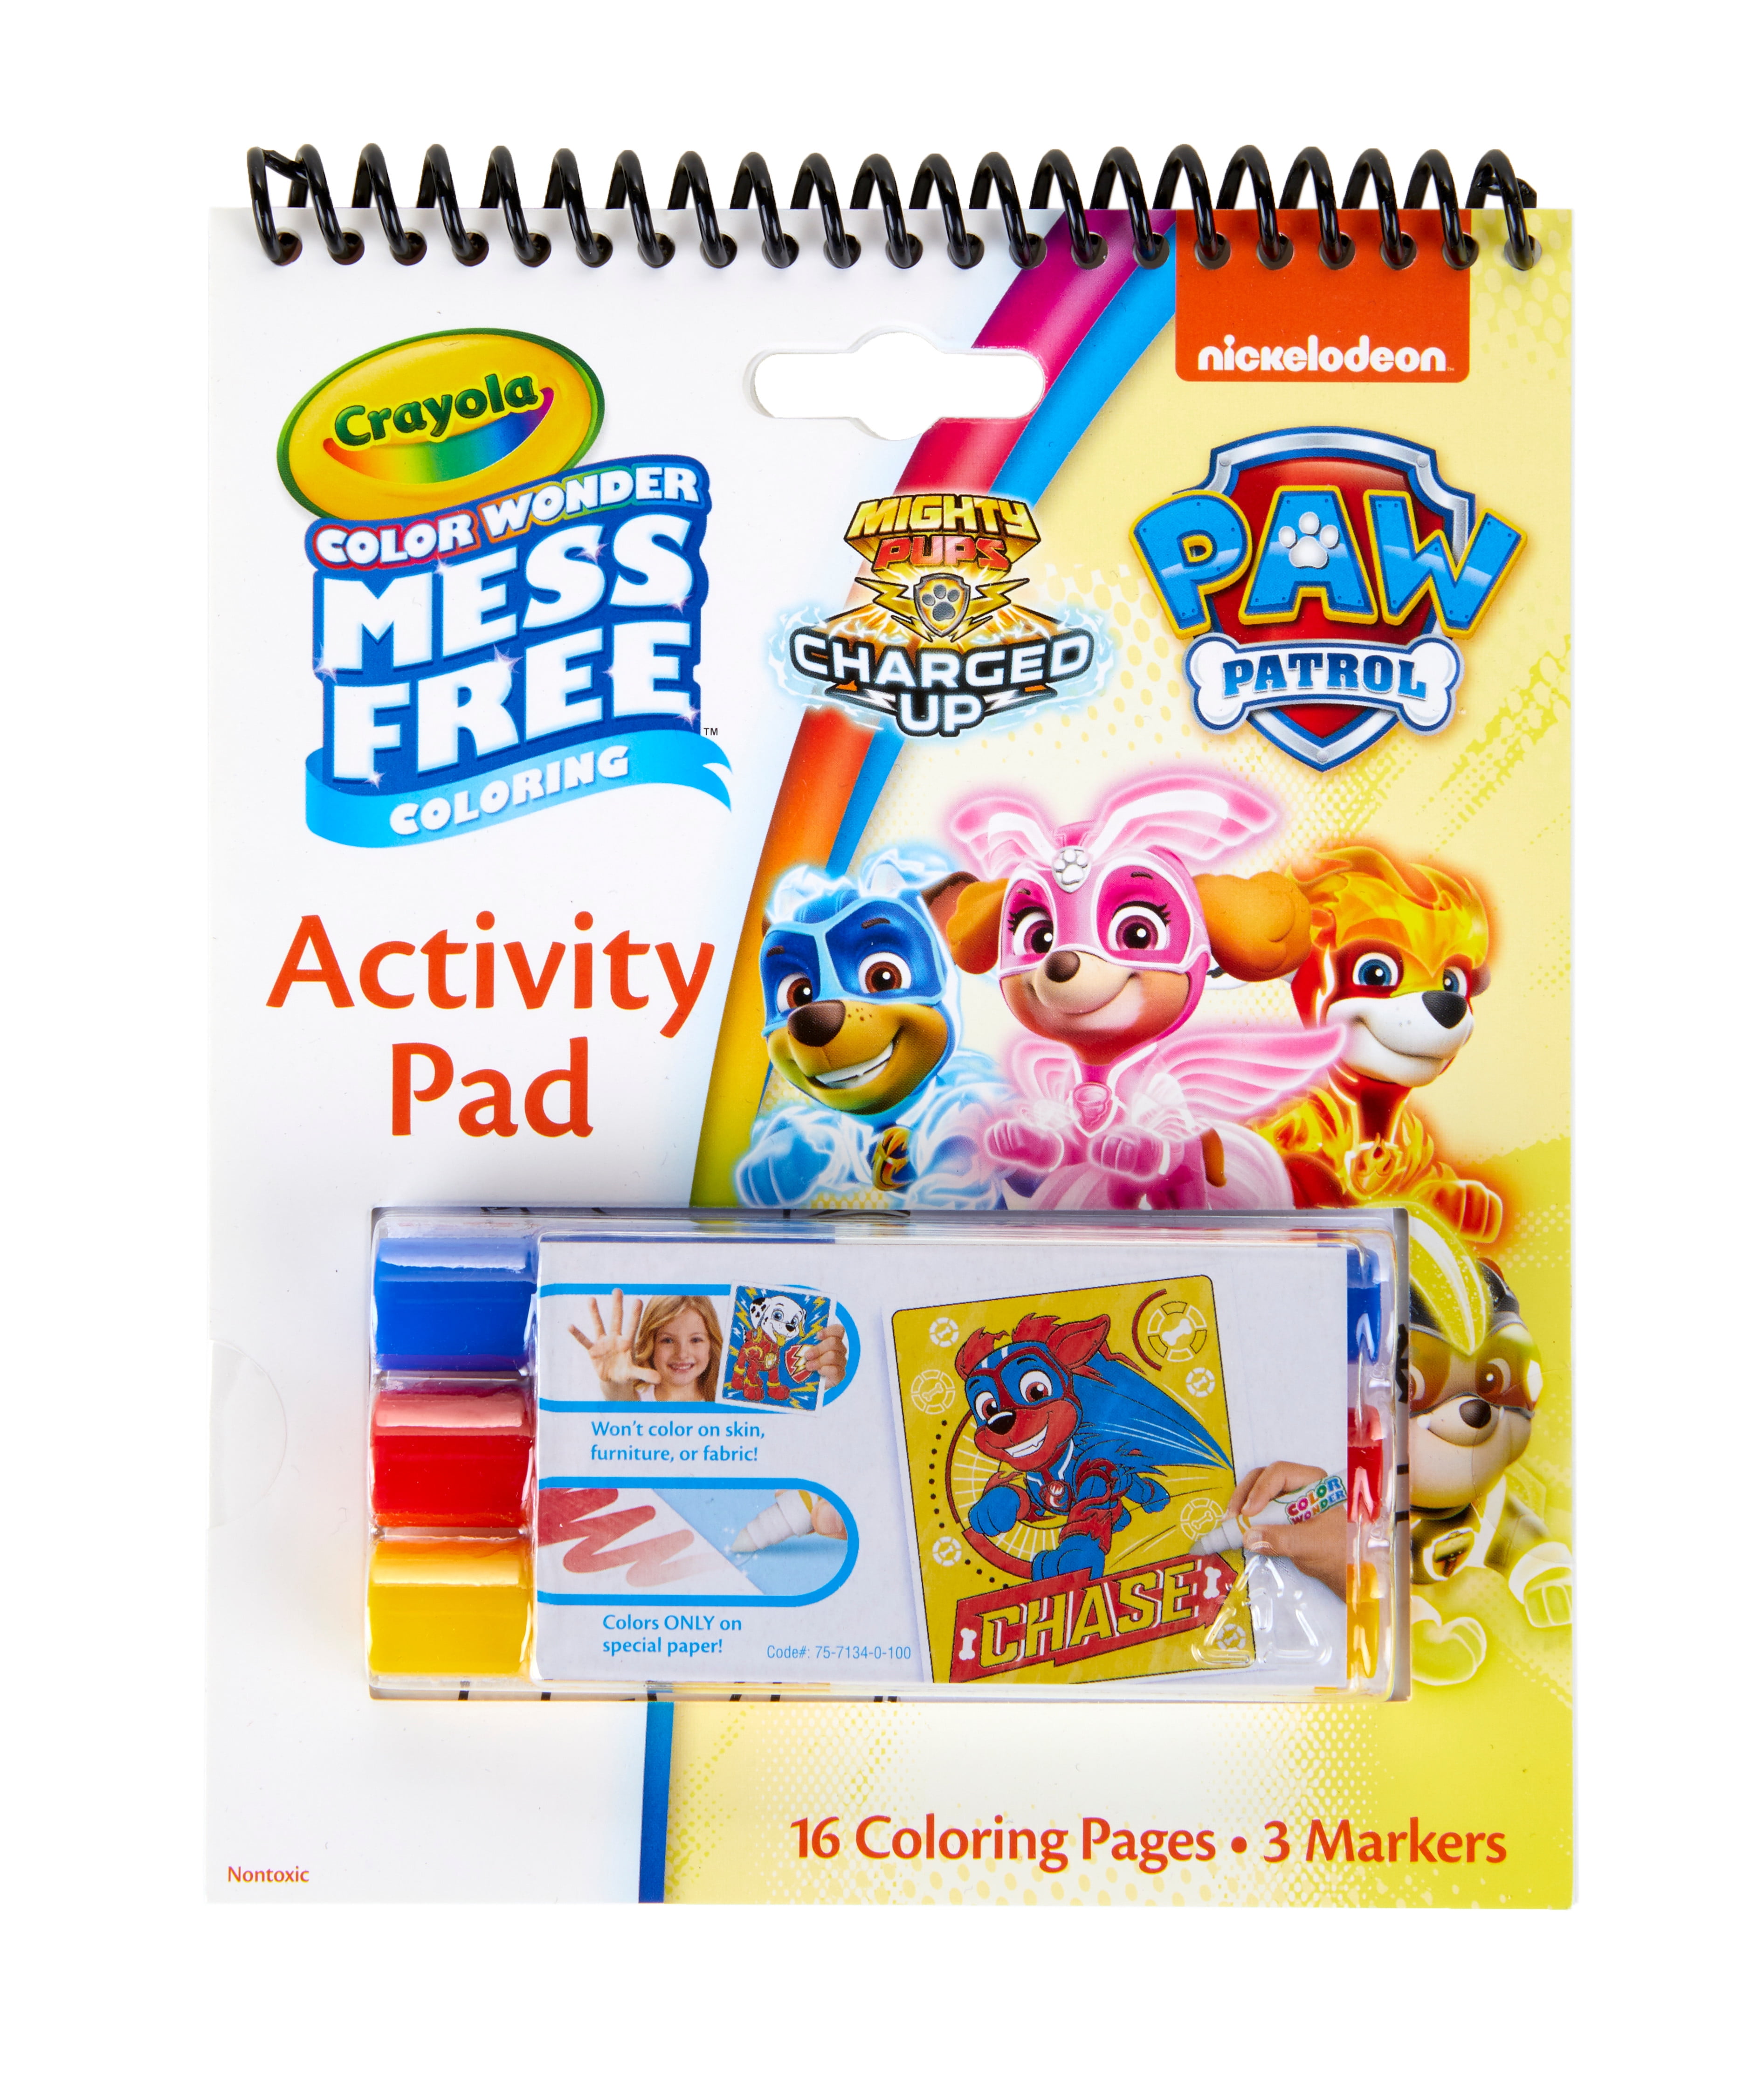 Crayola Color Wonder Mess Free Paw Patrol Ready Race Rescue, 18 Pages, Beginner Child, Size: Refill Book